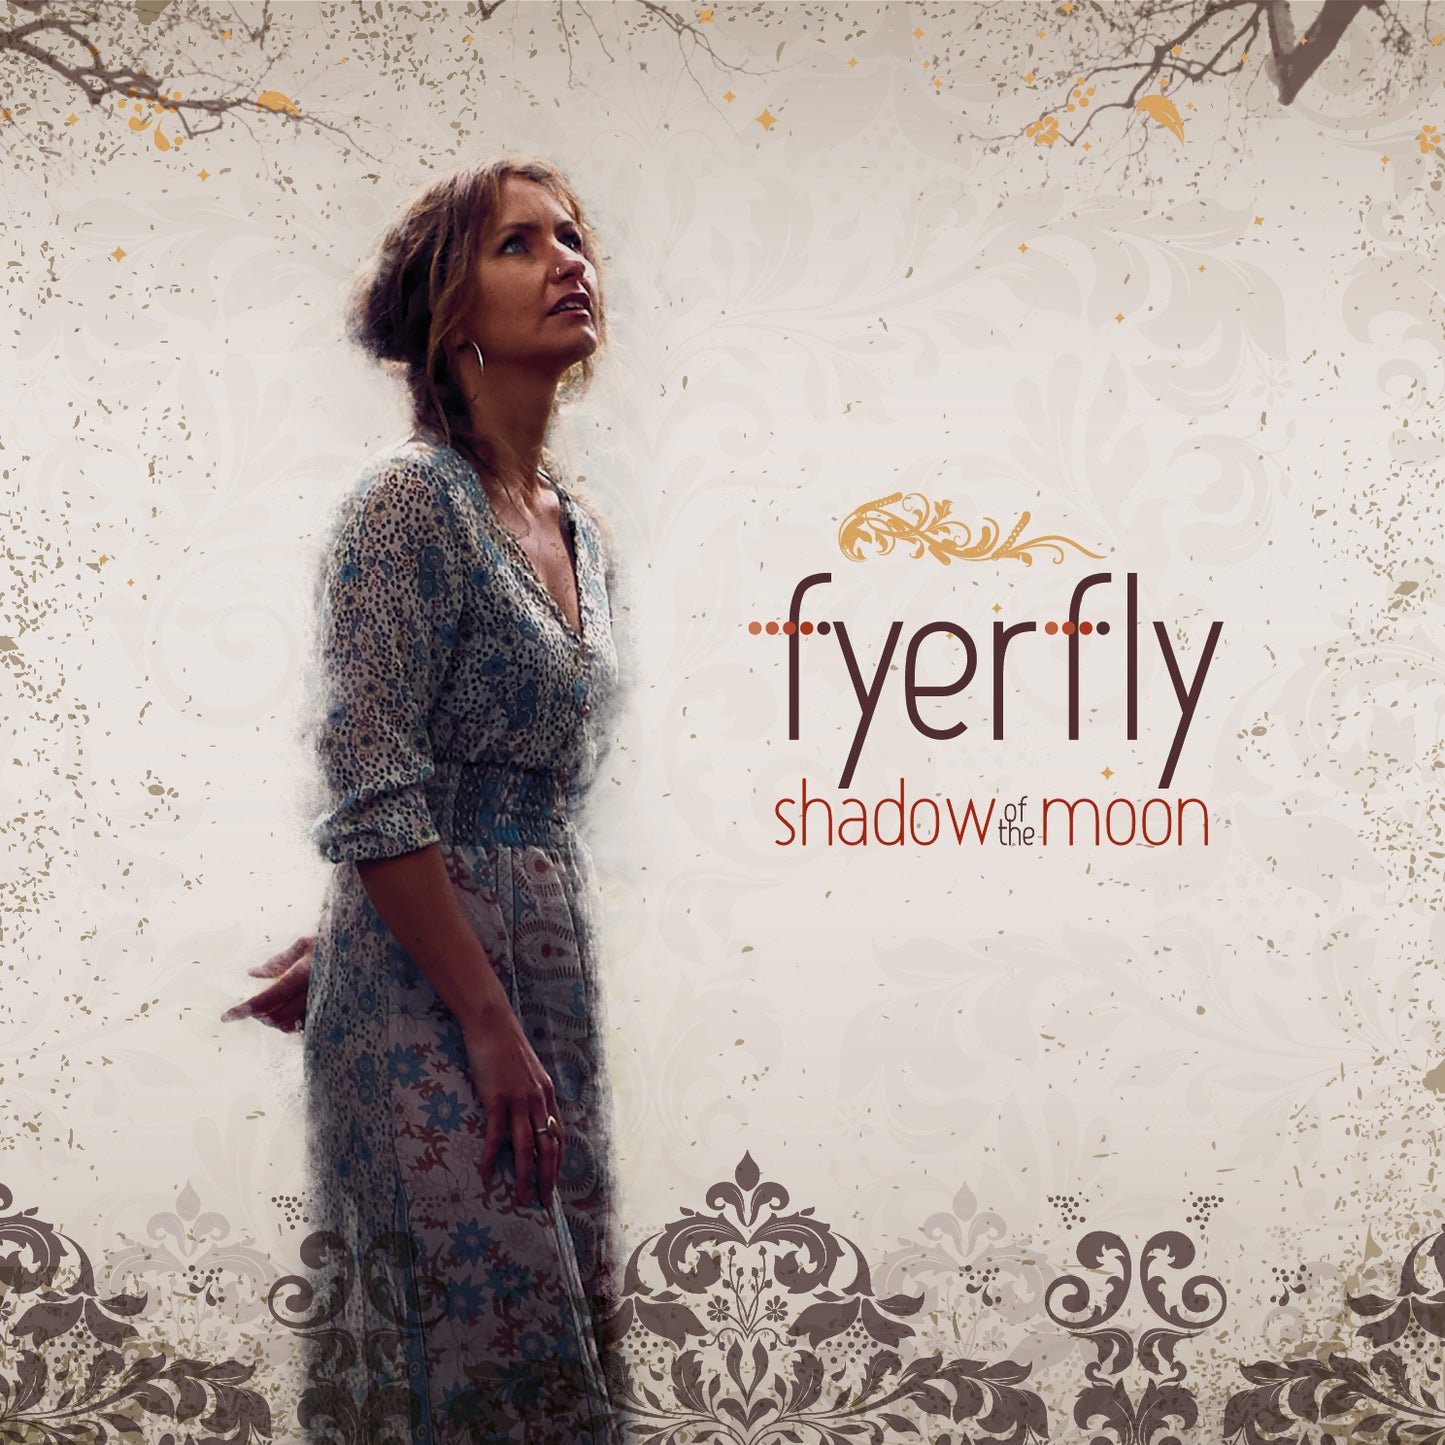 Shadow of the Moon is from the album 'Connect' by Fyerfly. A haunting and hypnotic track about meeting someone you feel you already know, and trusting them with a sense of knowing. Dark, airy, harmonic and dreamy.  Infusing elements of Alt Rock, Sadcore, Jazz and Blues, this deeply intimate and sultry album will soothe you as your soul is immersed in its serene and haunting sounds.